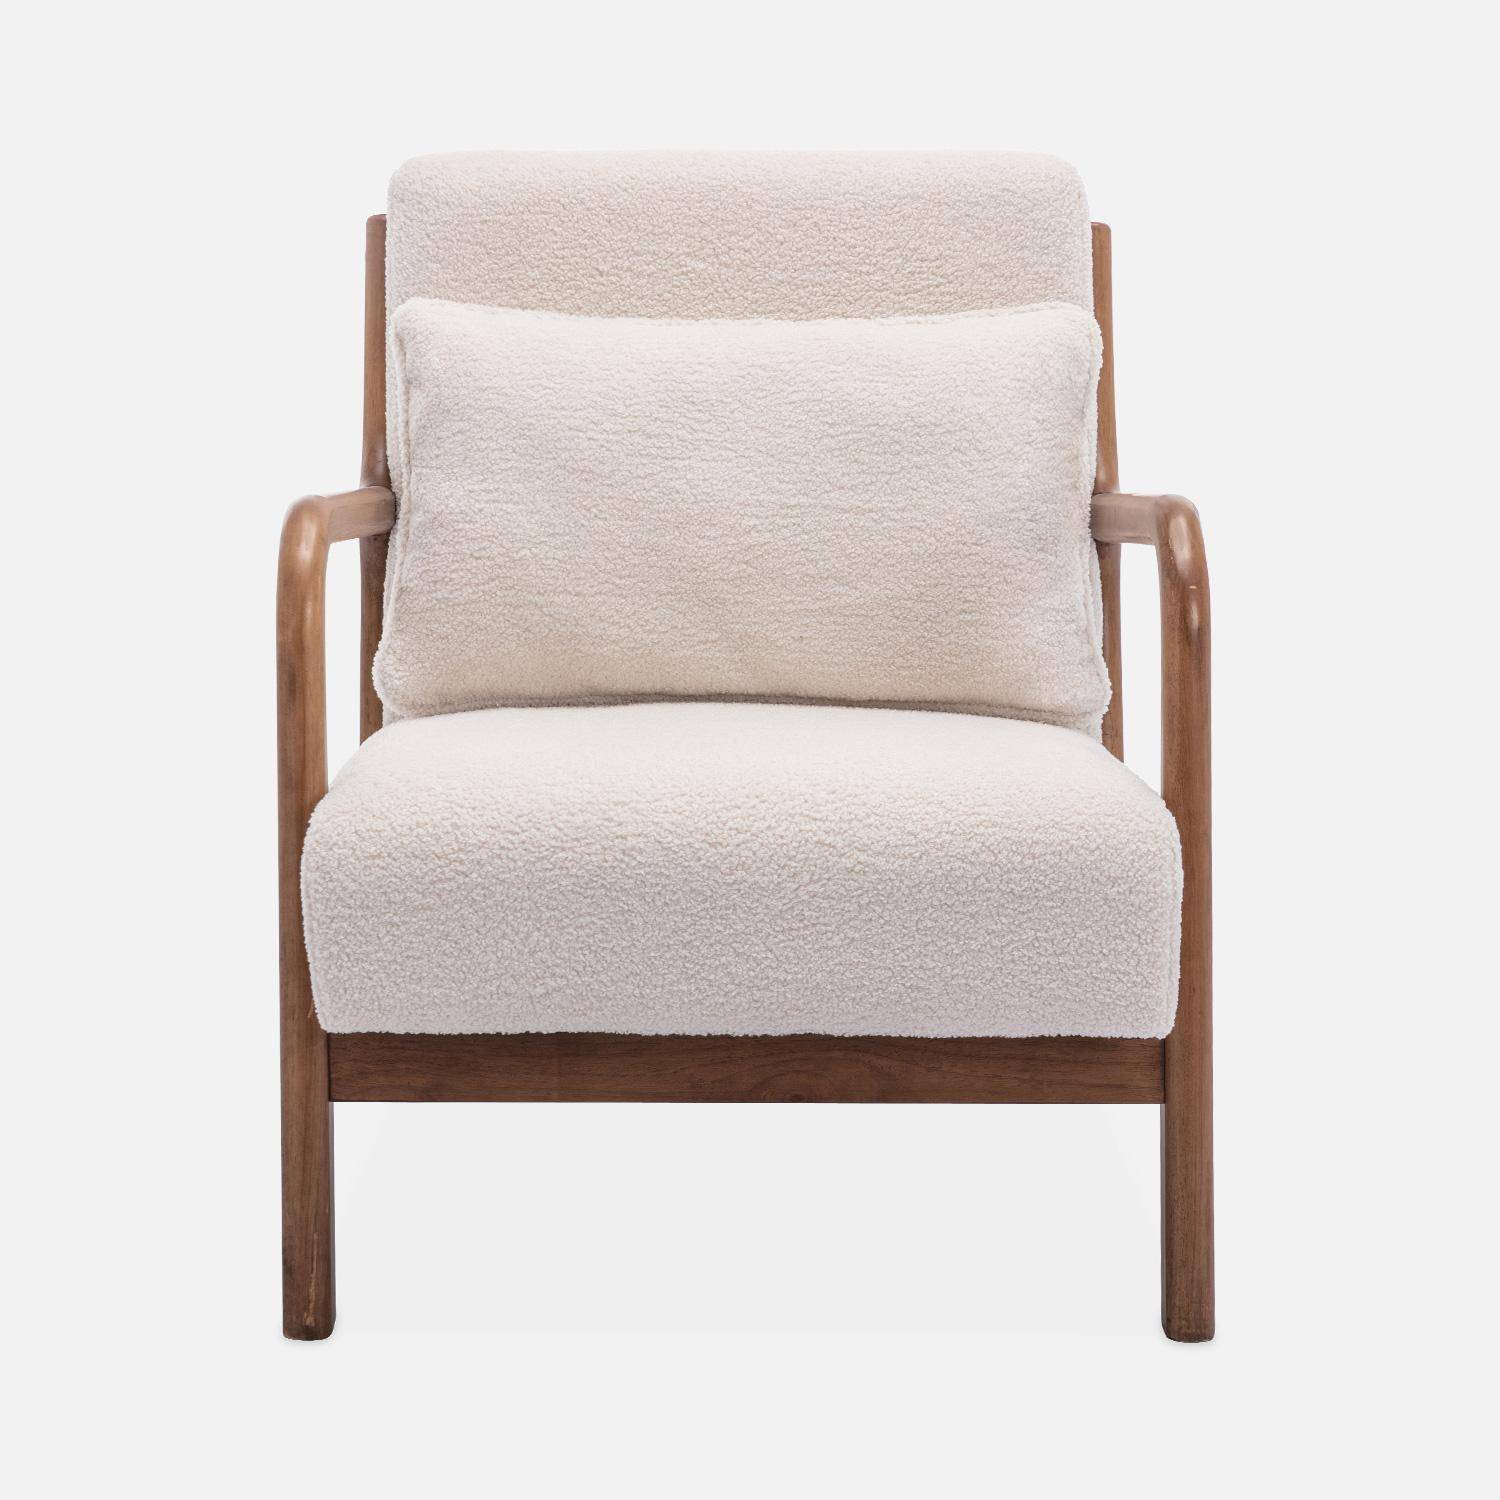 Cosy boucle wooden armchair with scandi-style compass legs and cushion, Light Walnut Stained Hevea Wood, Lorens, White Photo4